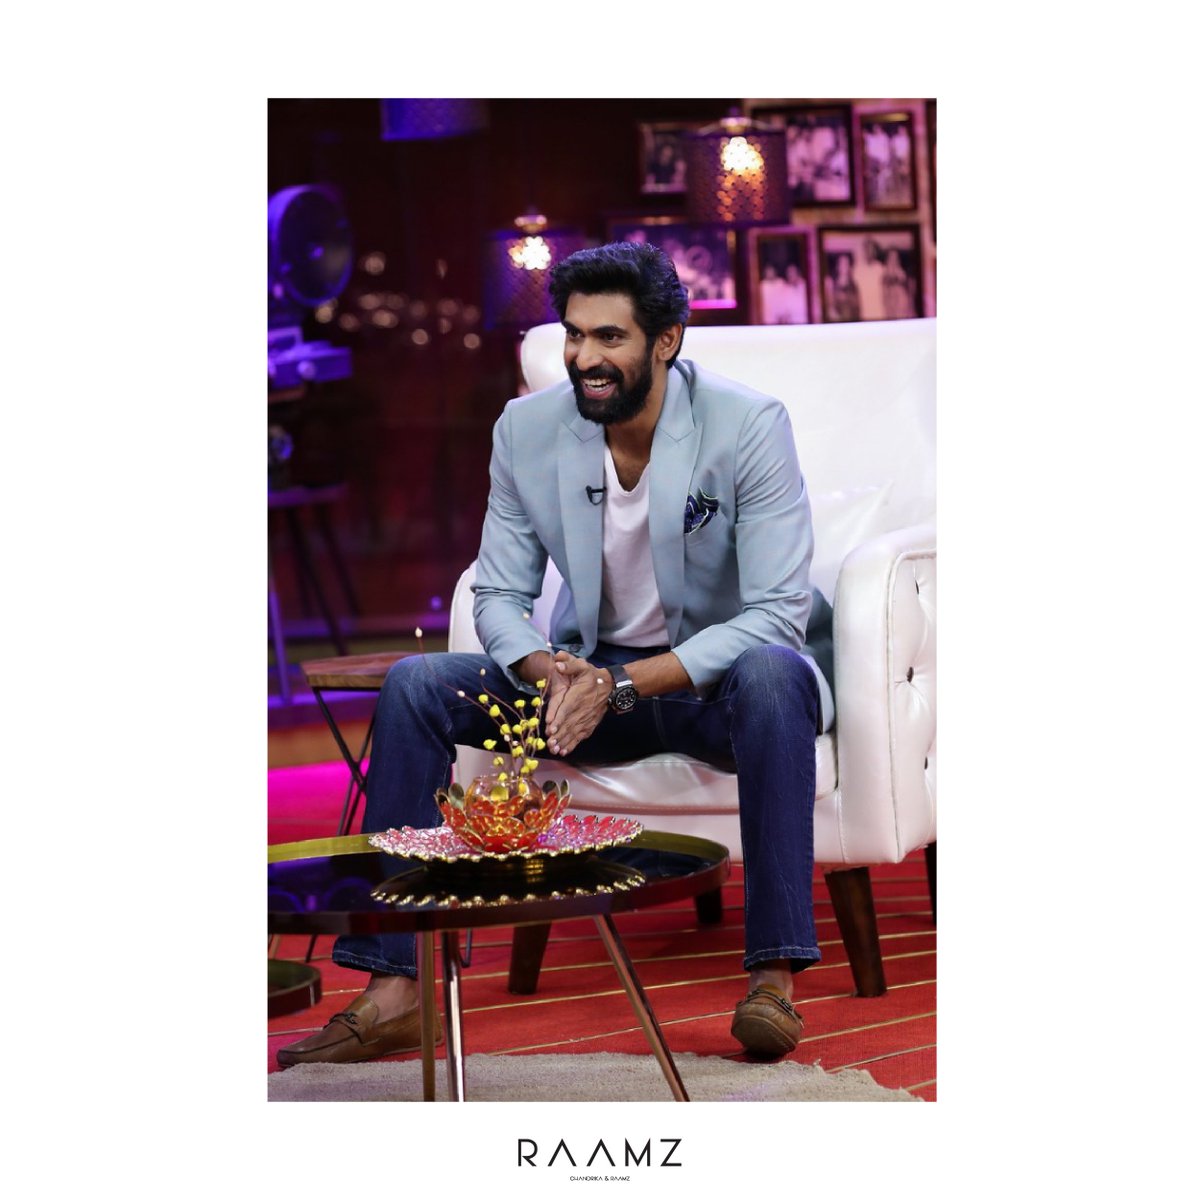 Always looking his best, @RanaDaggubati in a Raamz creation. Styled by - Harmann Kaur Photographed by - Santhosh #Raamz #RaamzOfficial #RanaDaggubati #Actor #Fashion #Formals #MenWithClass #Suit #Style